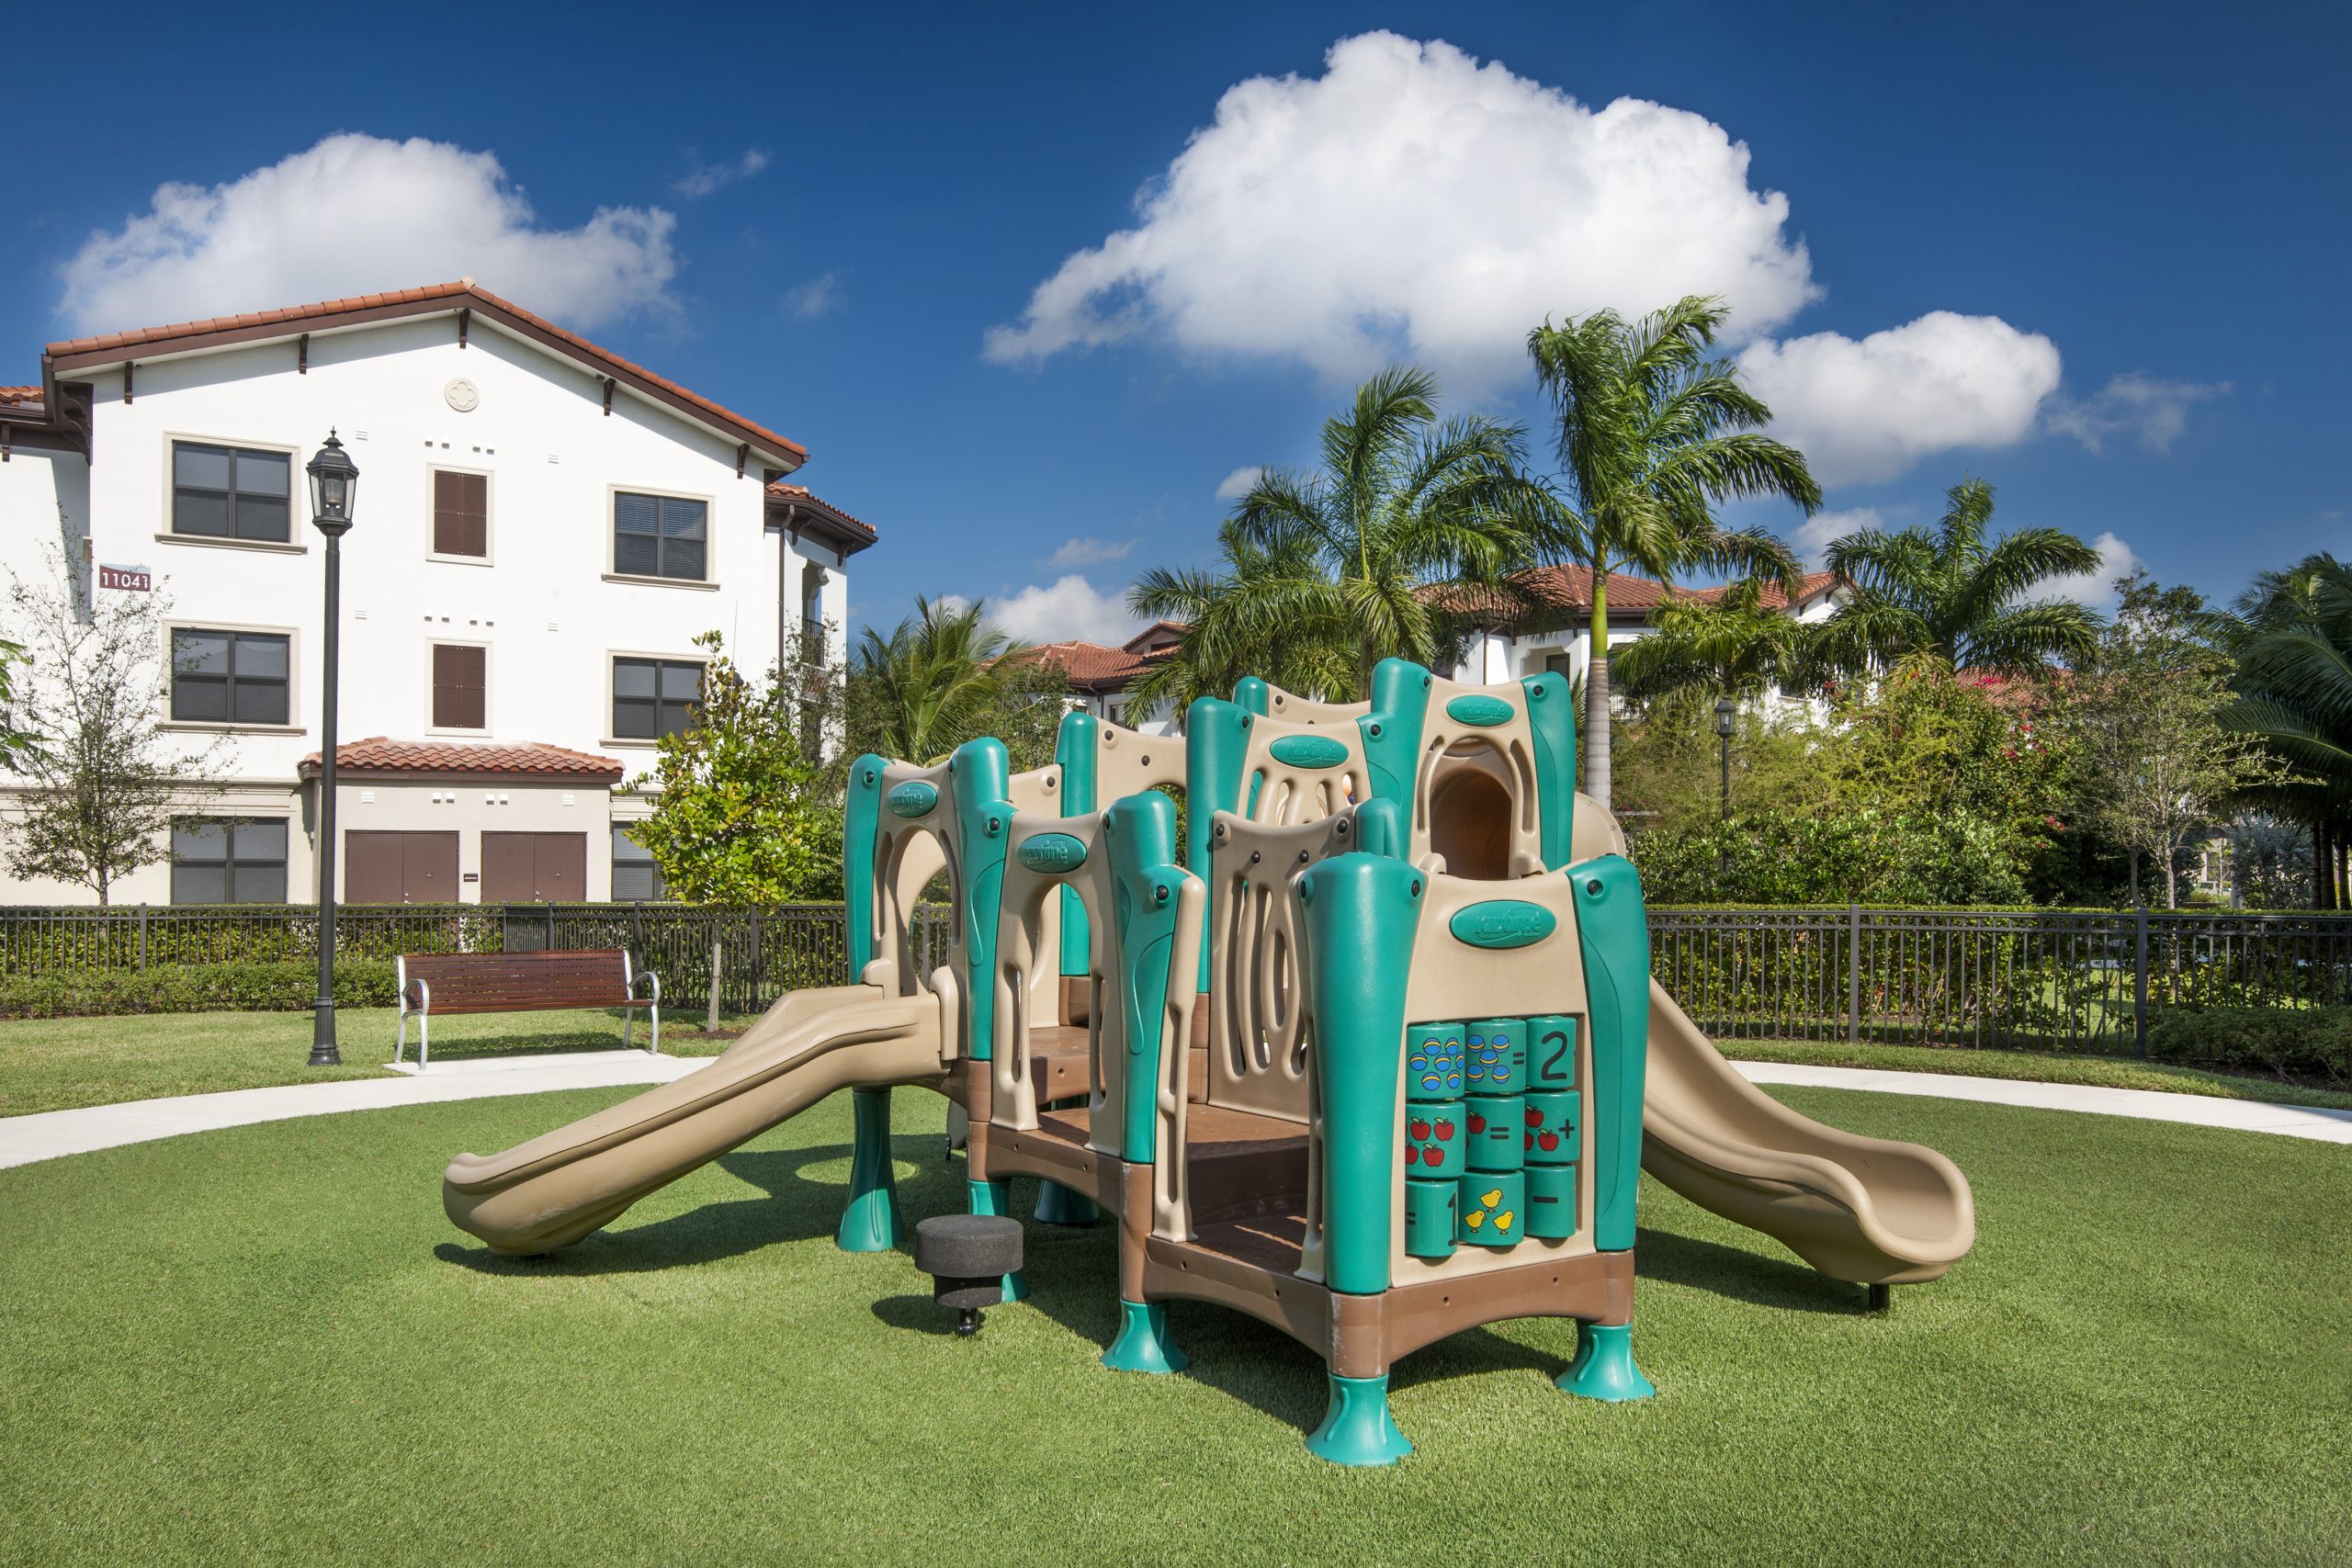 Apartments in Miramar A playground with a slide and swings in front of an apartment building. Miramar Park Apartments